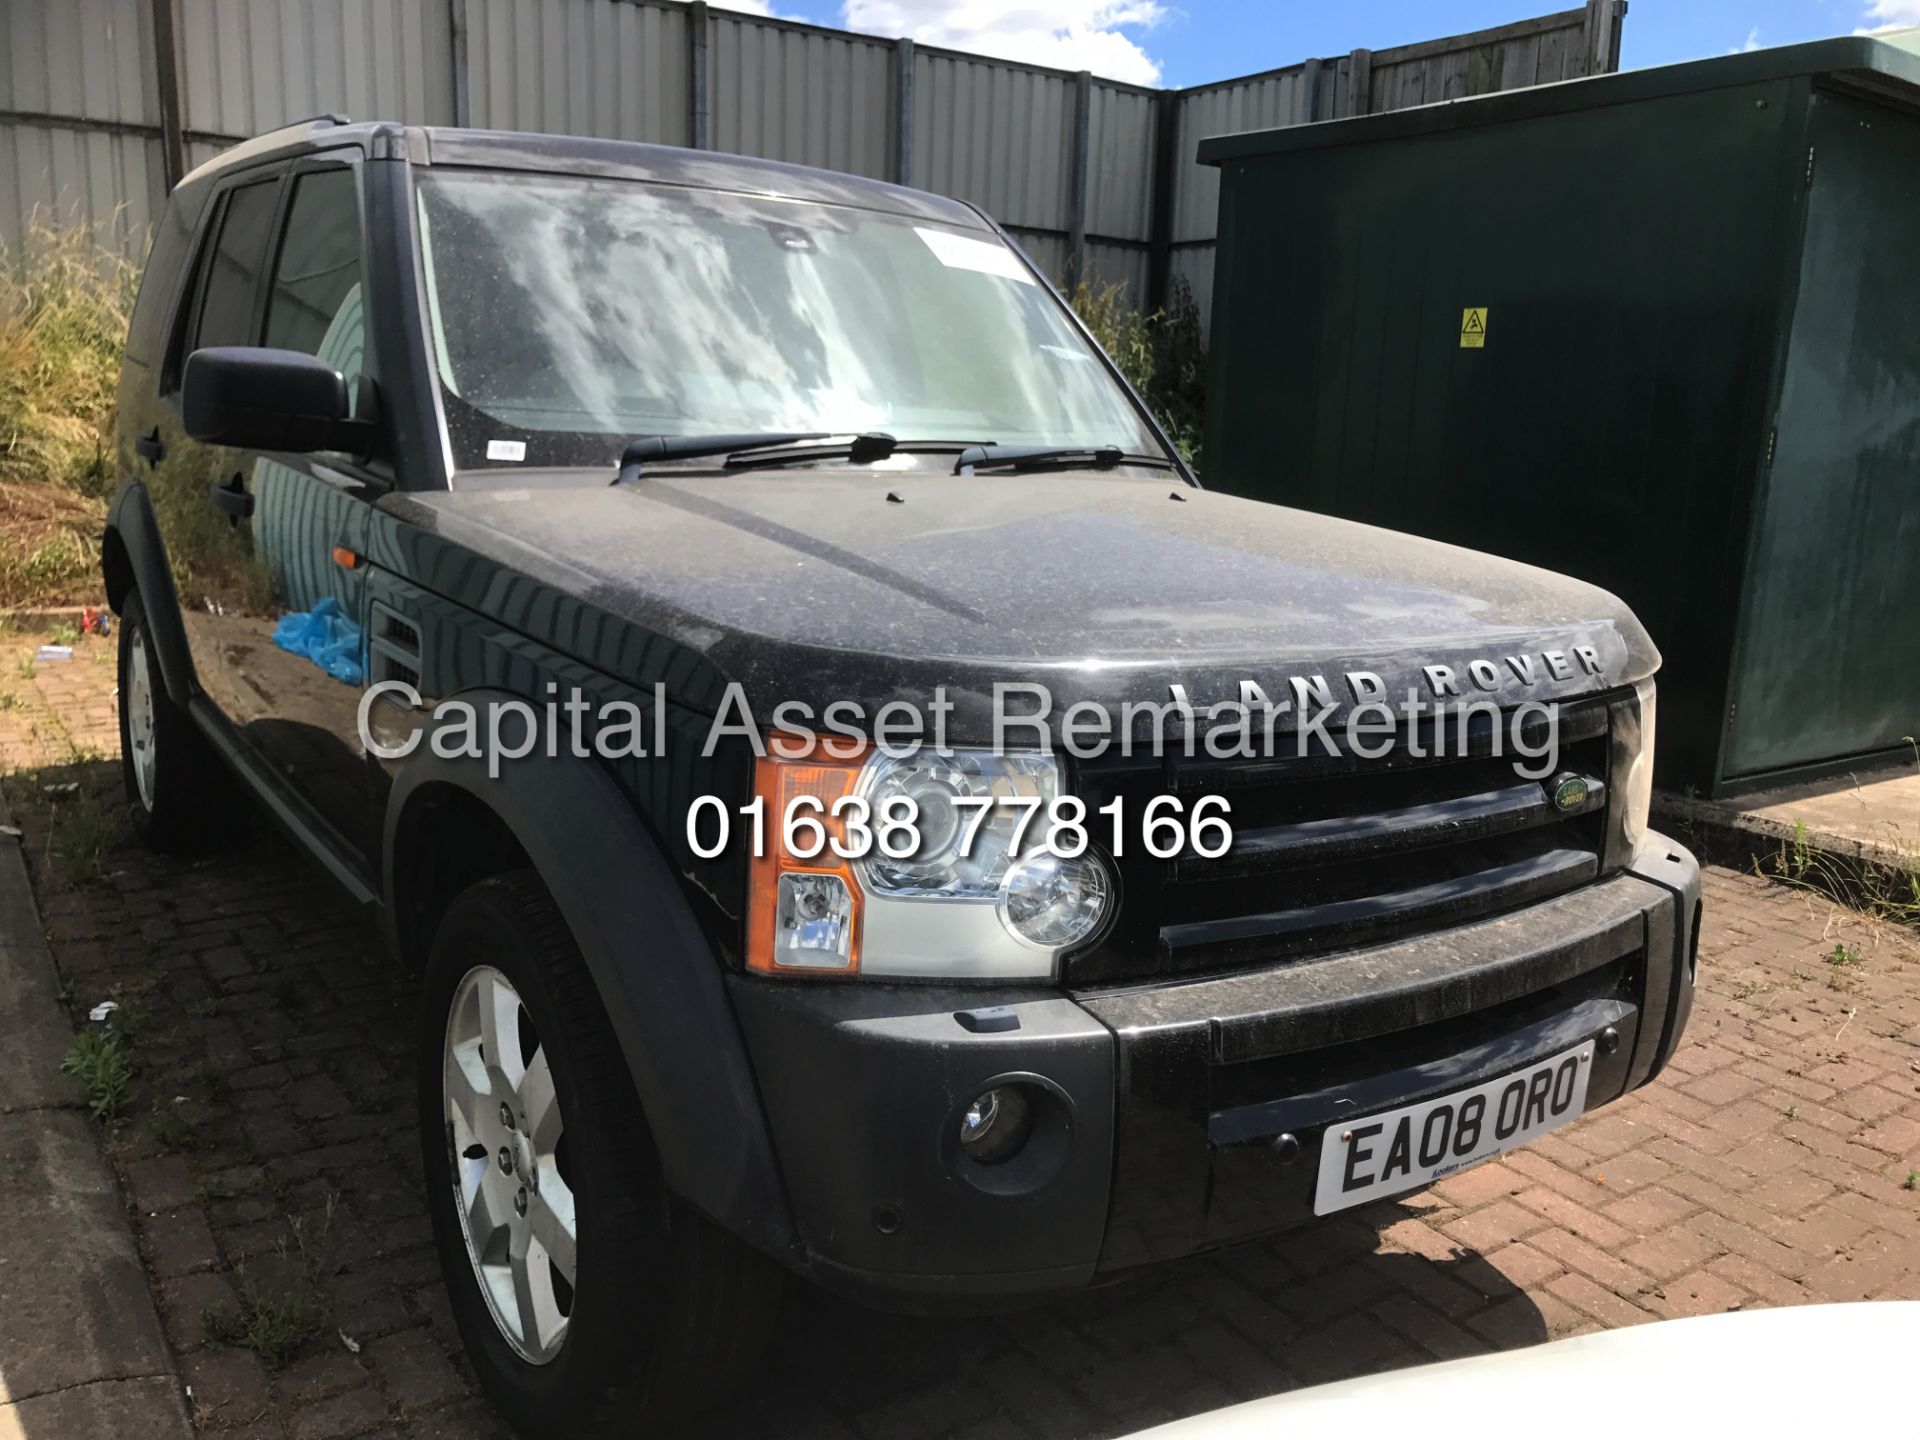 (ON SALE) LANDROVER DISCOVERY 3 "TDV6 "HSE" AUTOMATIC (08 REG) BLACK - FSH - LEATHER - SAT NAV - - Image 3 of 16